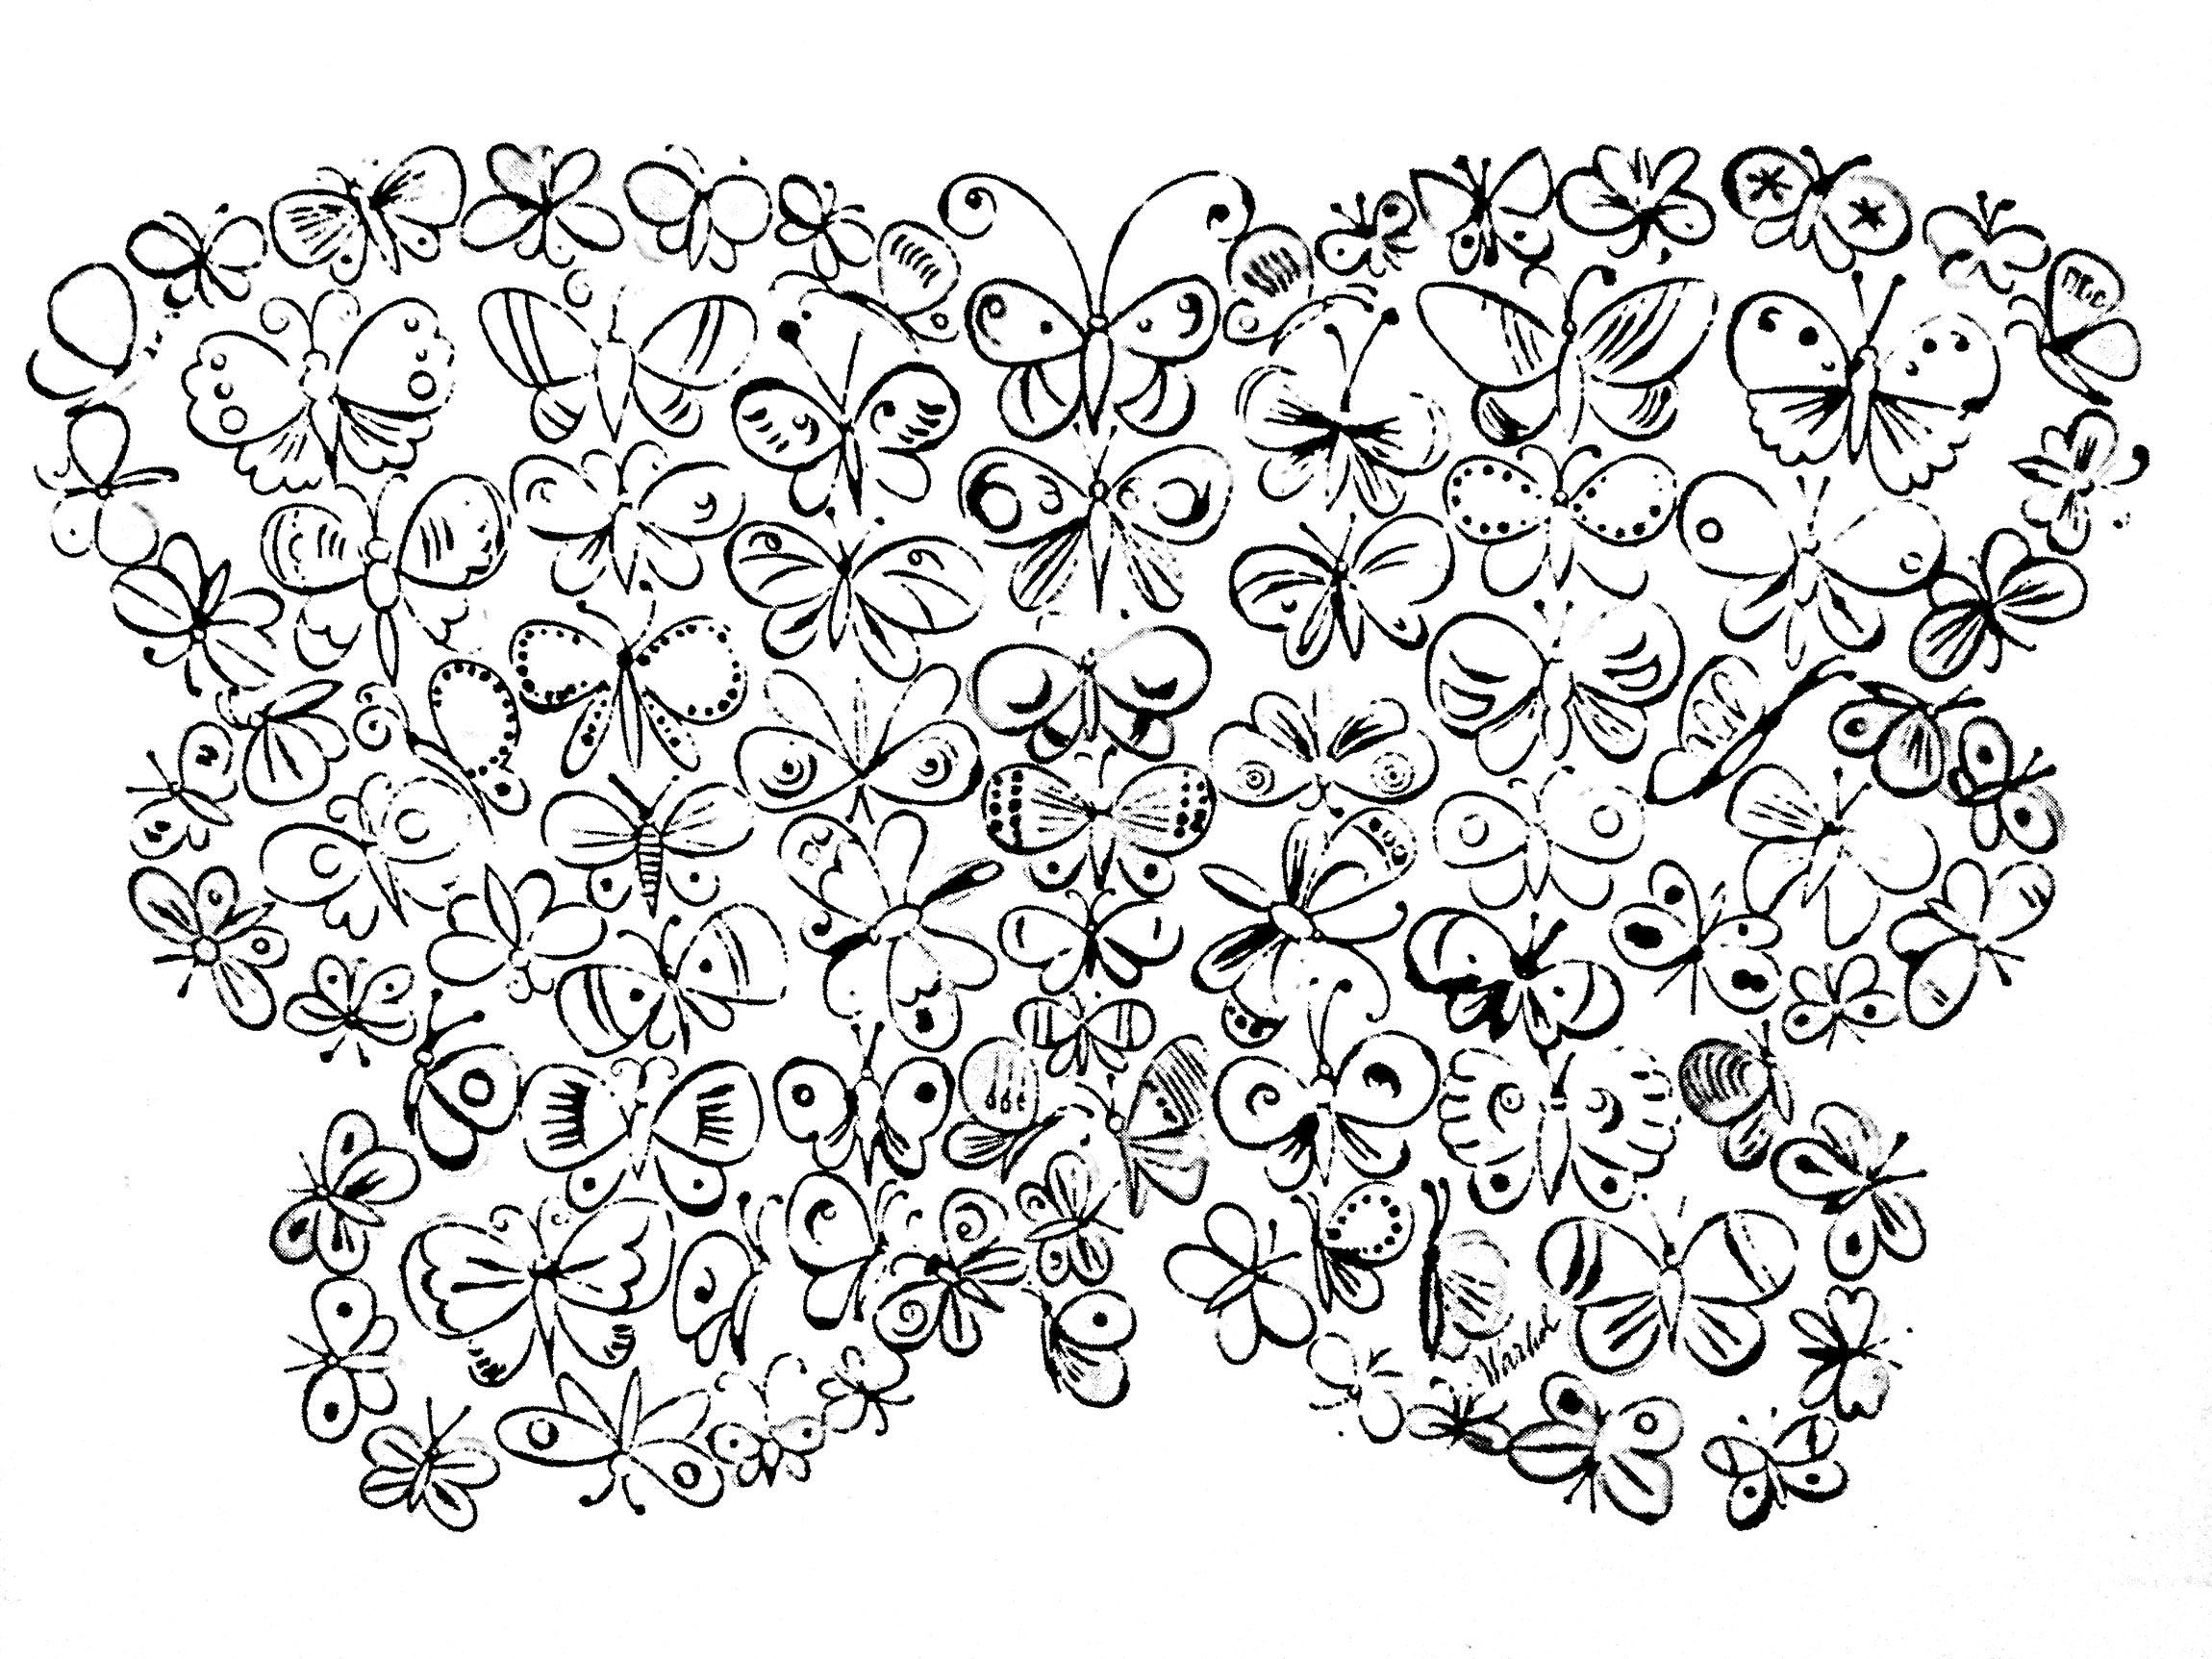 Coloring page inspired by a painting by Andy Warhol with butterflies